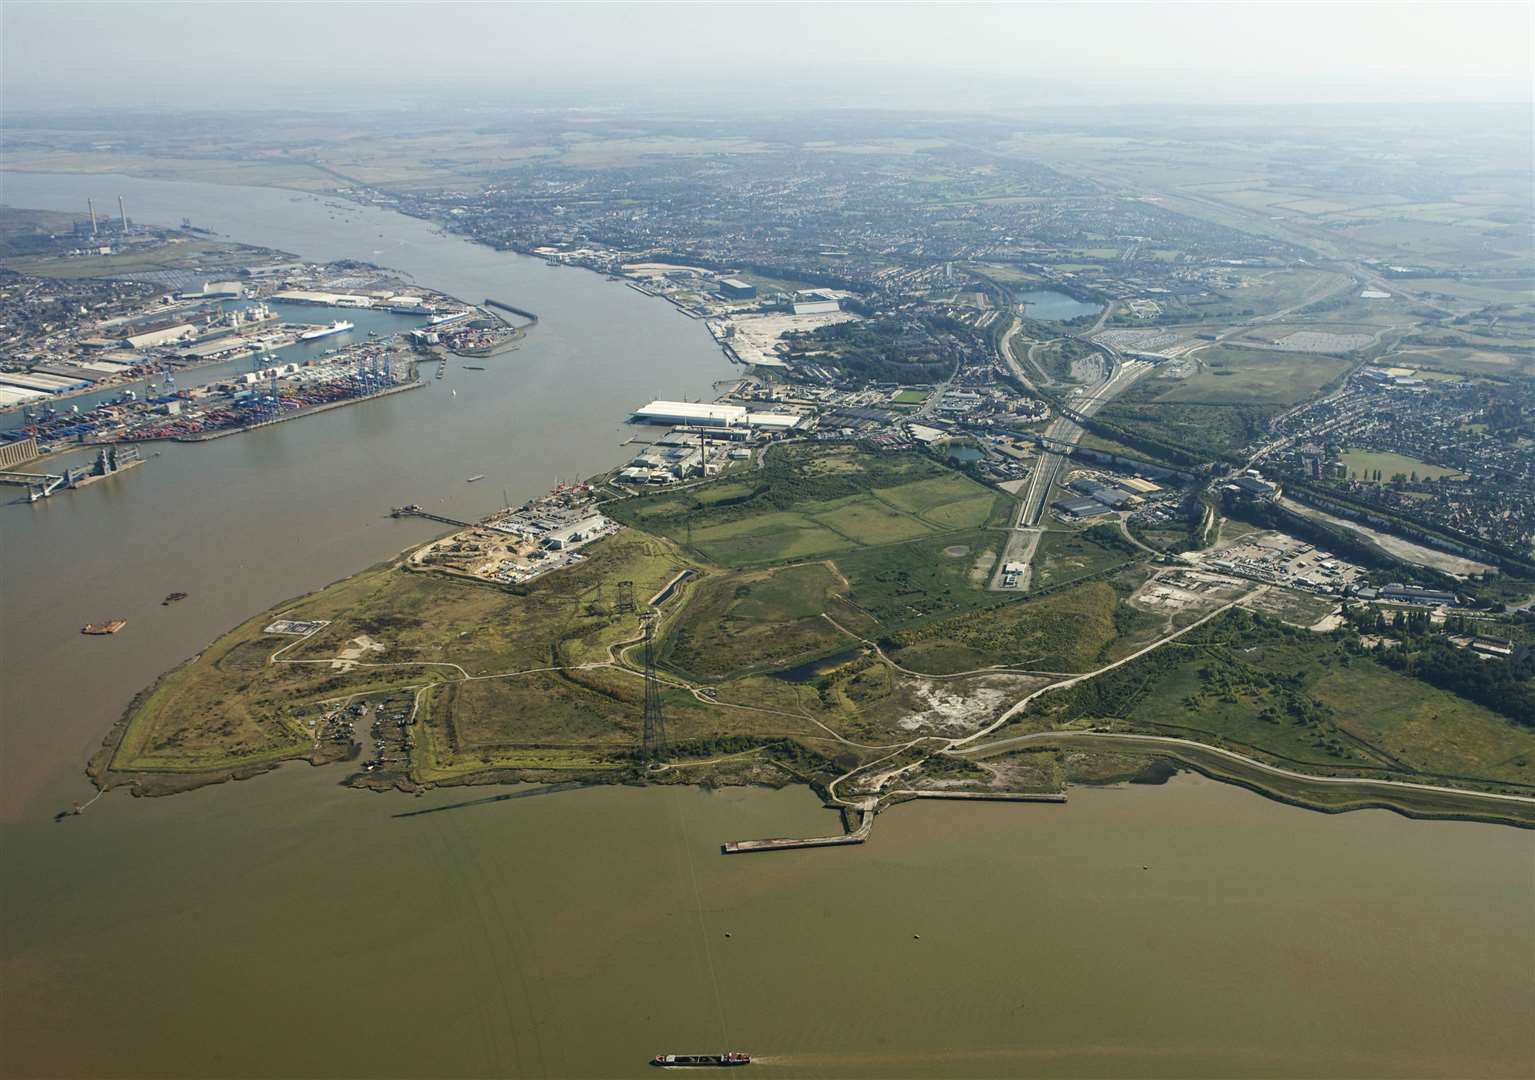 The London Resort is earmarked to be built on parts of the SSSI protected Swanscombe Peninsula. Picture: EDF Energy